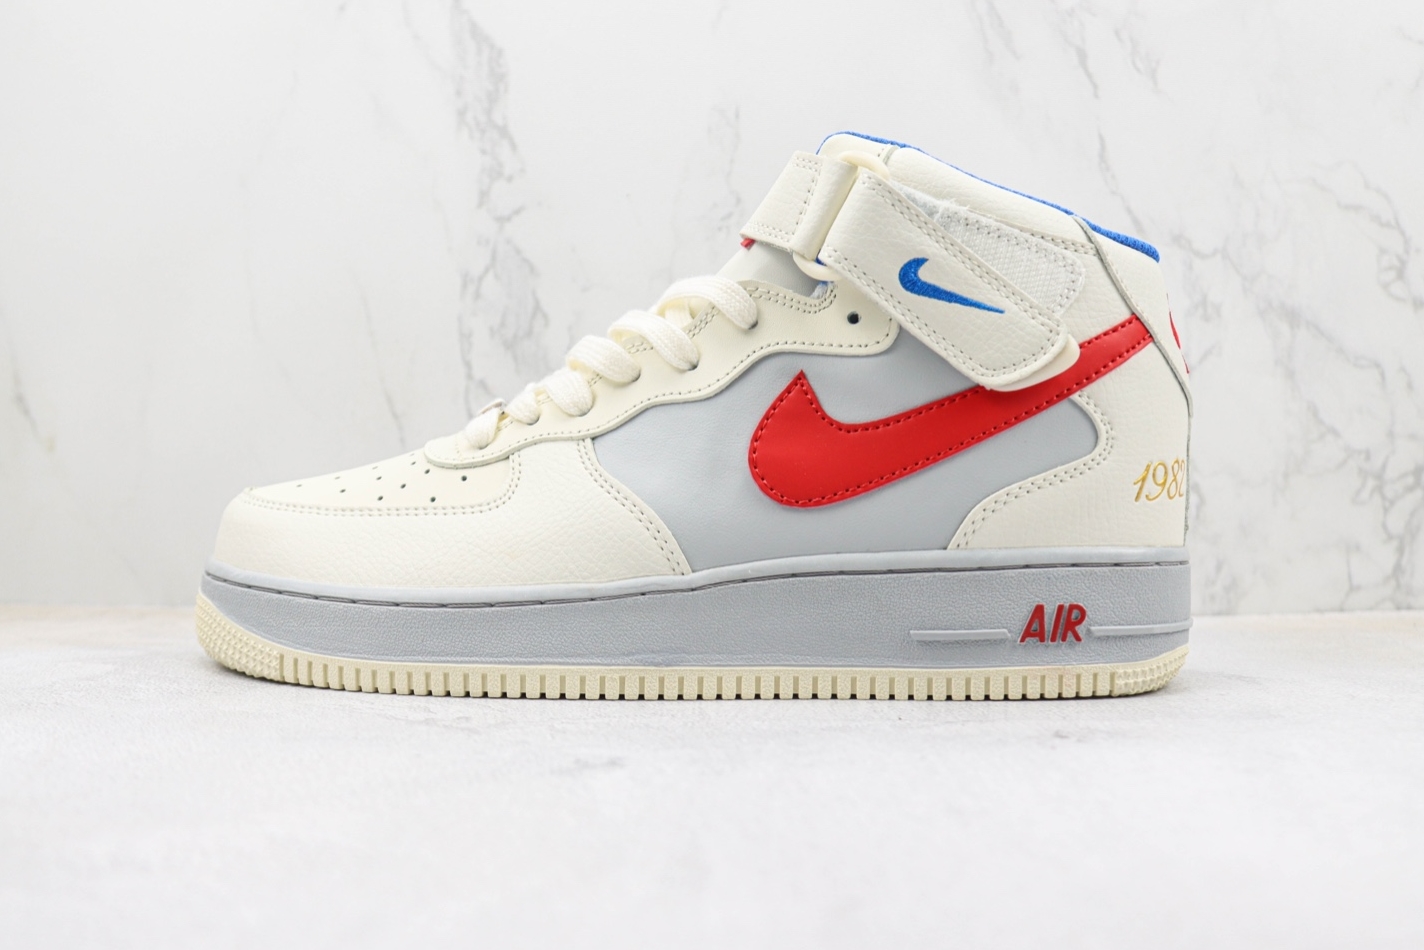 Nike Air Force 1 07 Mid Toffee Light Grey Red Blue CW0088-928 - Buy Online Now!